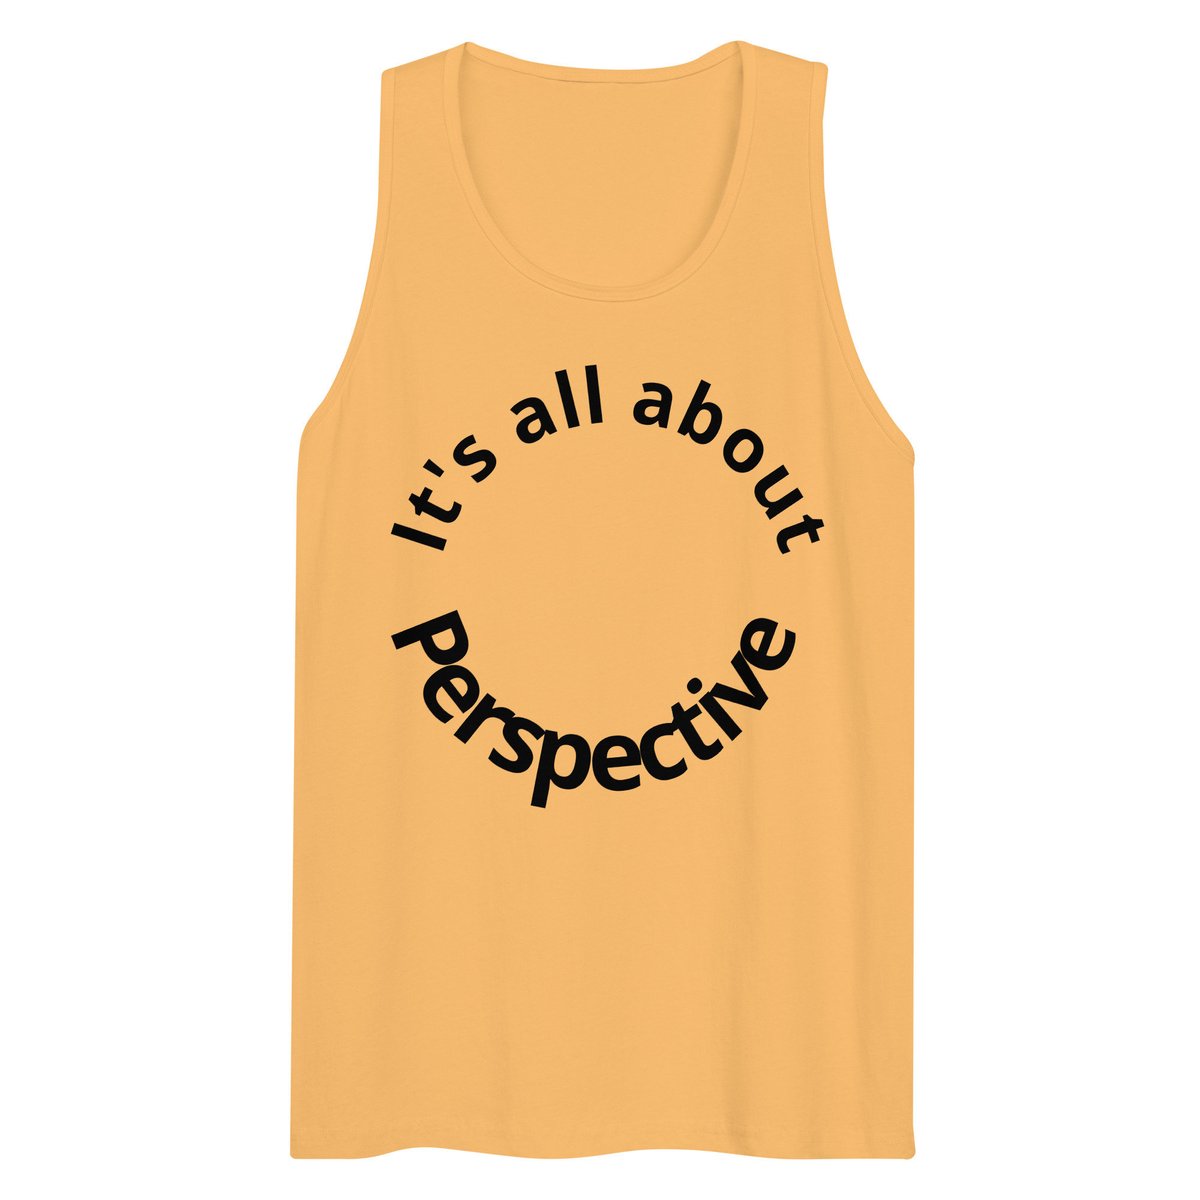 Excited to share the latest addition to my #etsy shop: Men’s Premium Motivational Tank Top etsy.me/3pYmNBO #positiveperspective #mindfulness #positivity #gratitude #yoga #meditation #pilates #selflove #inspiration